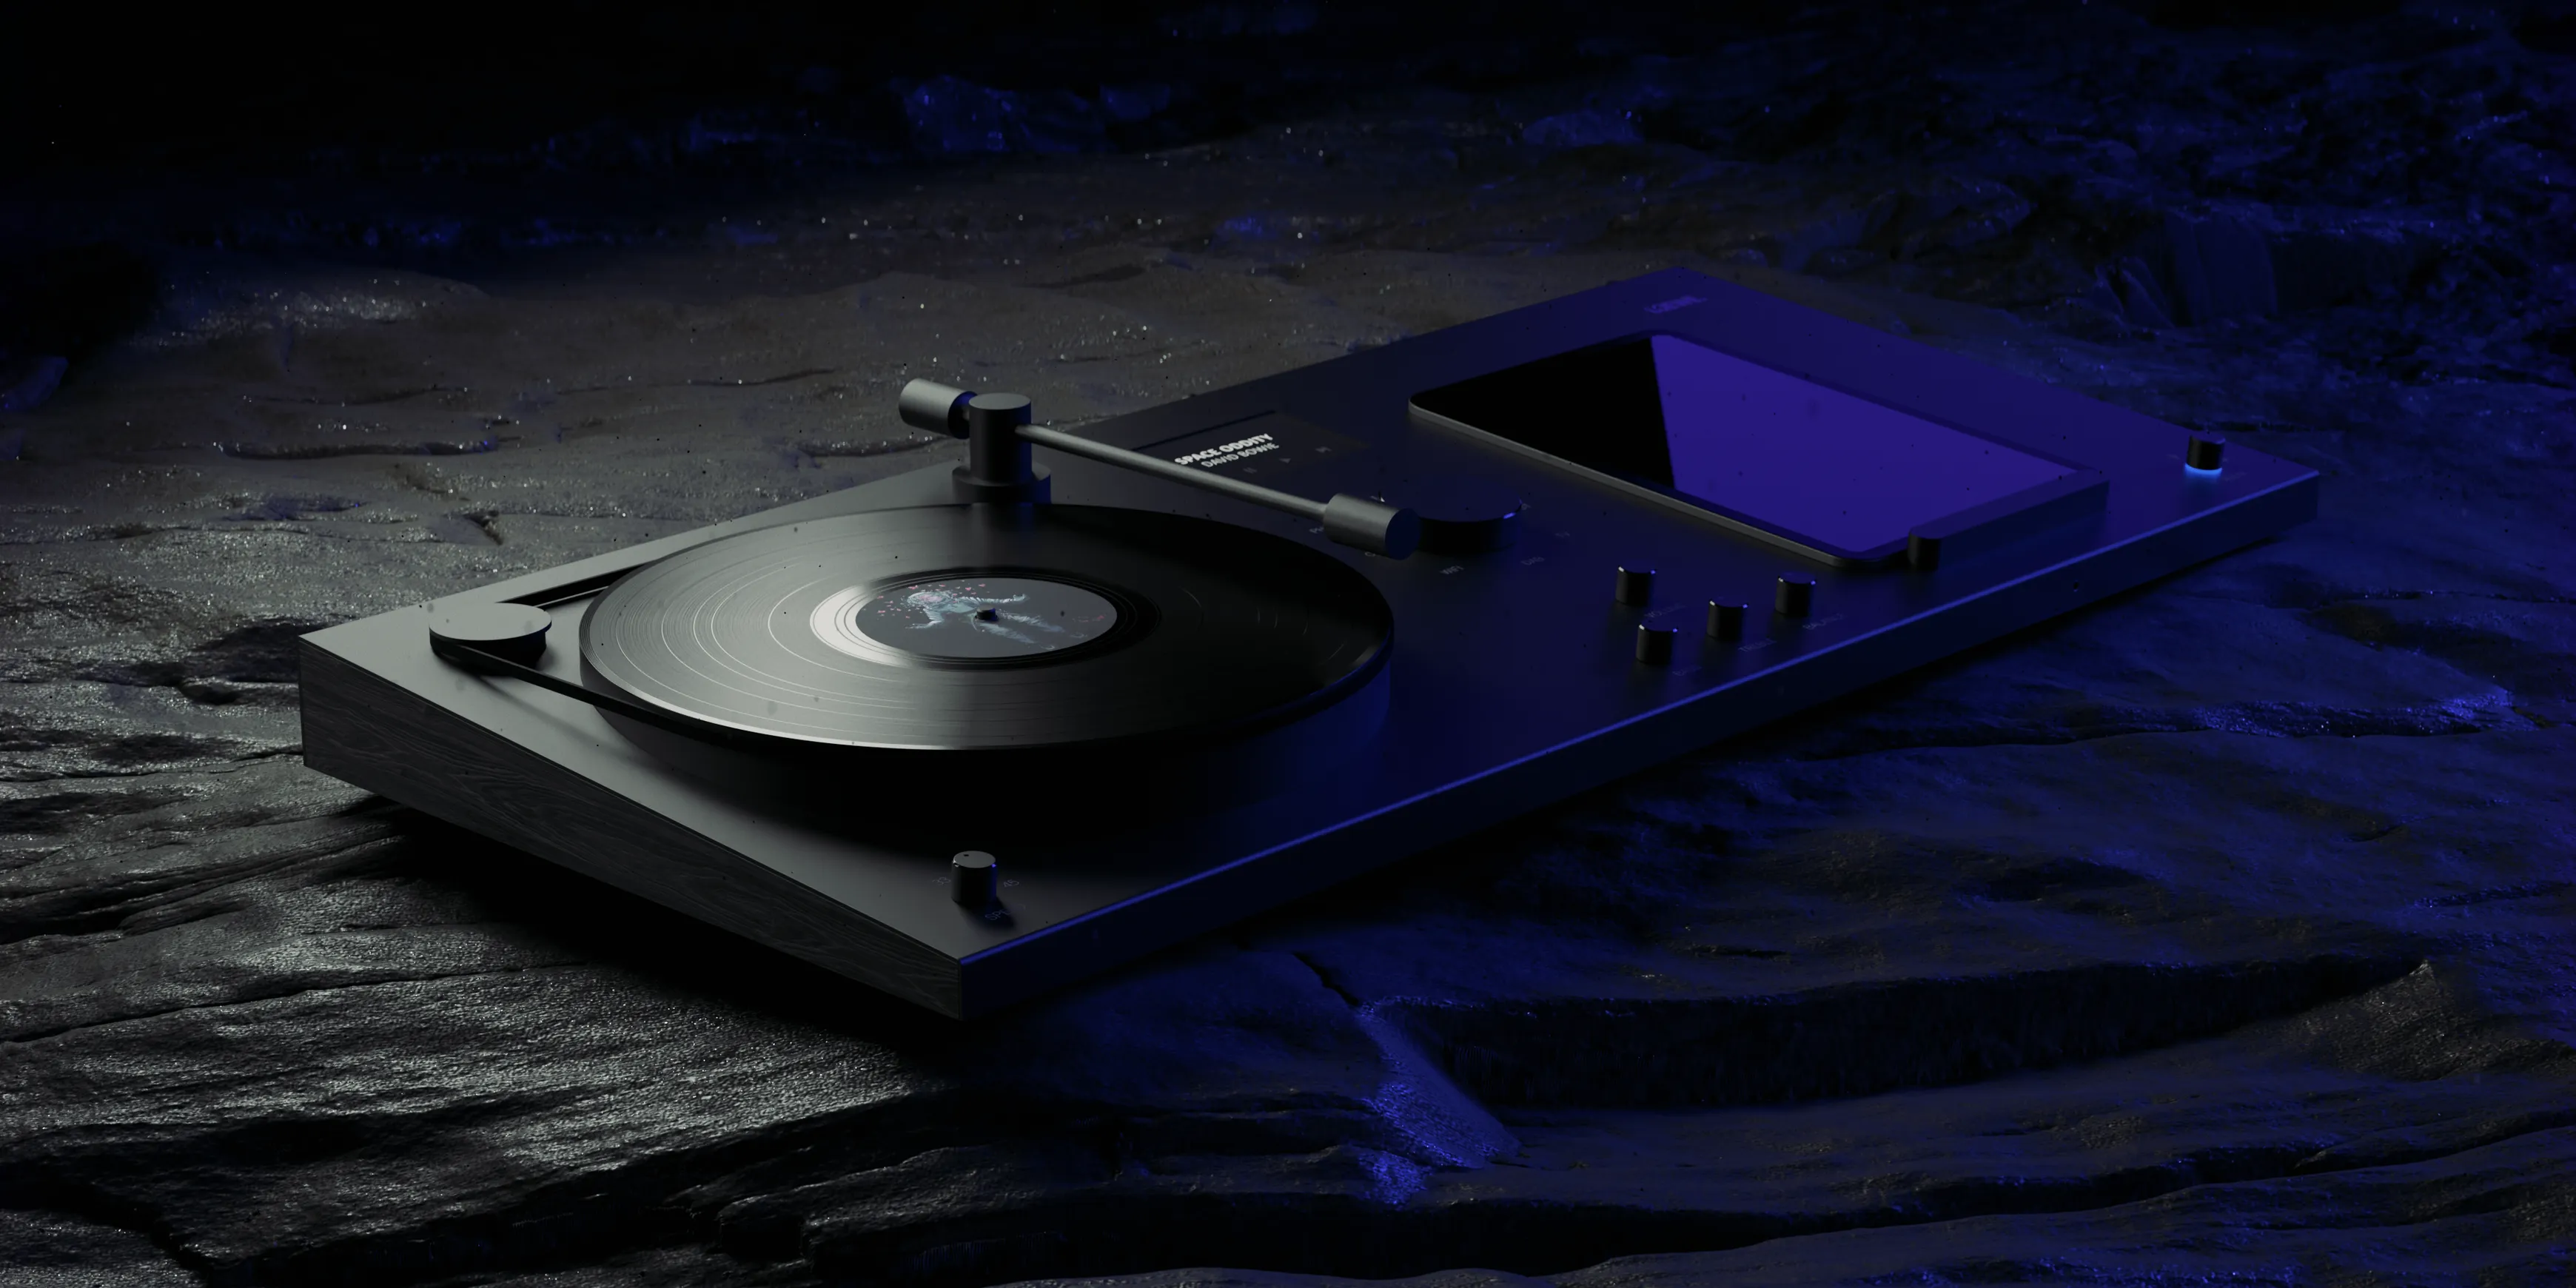 A Loewe music player on a rocky surface